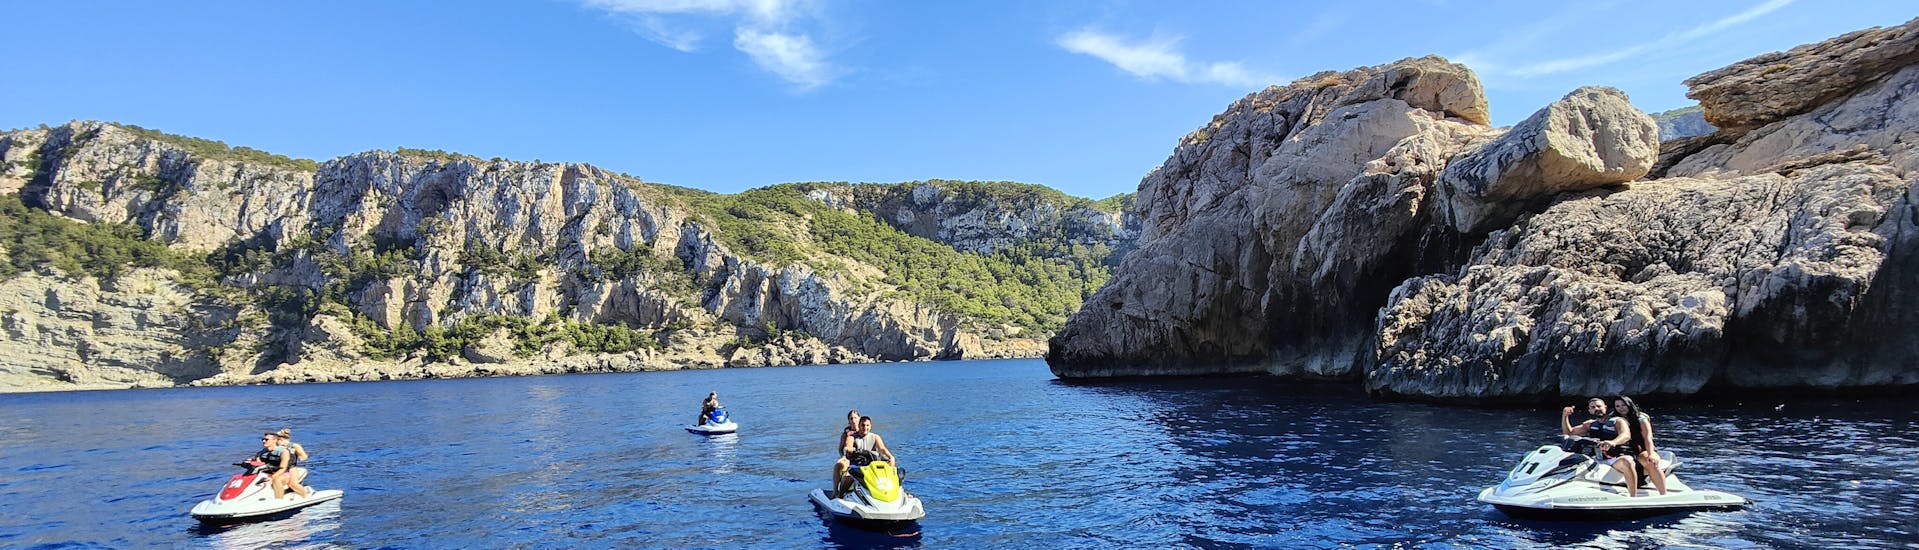 Jet skis enjoying a tour to Cala Salada from San Antonio with Es Vedrà Charter.